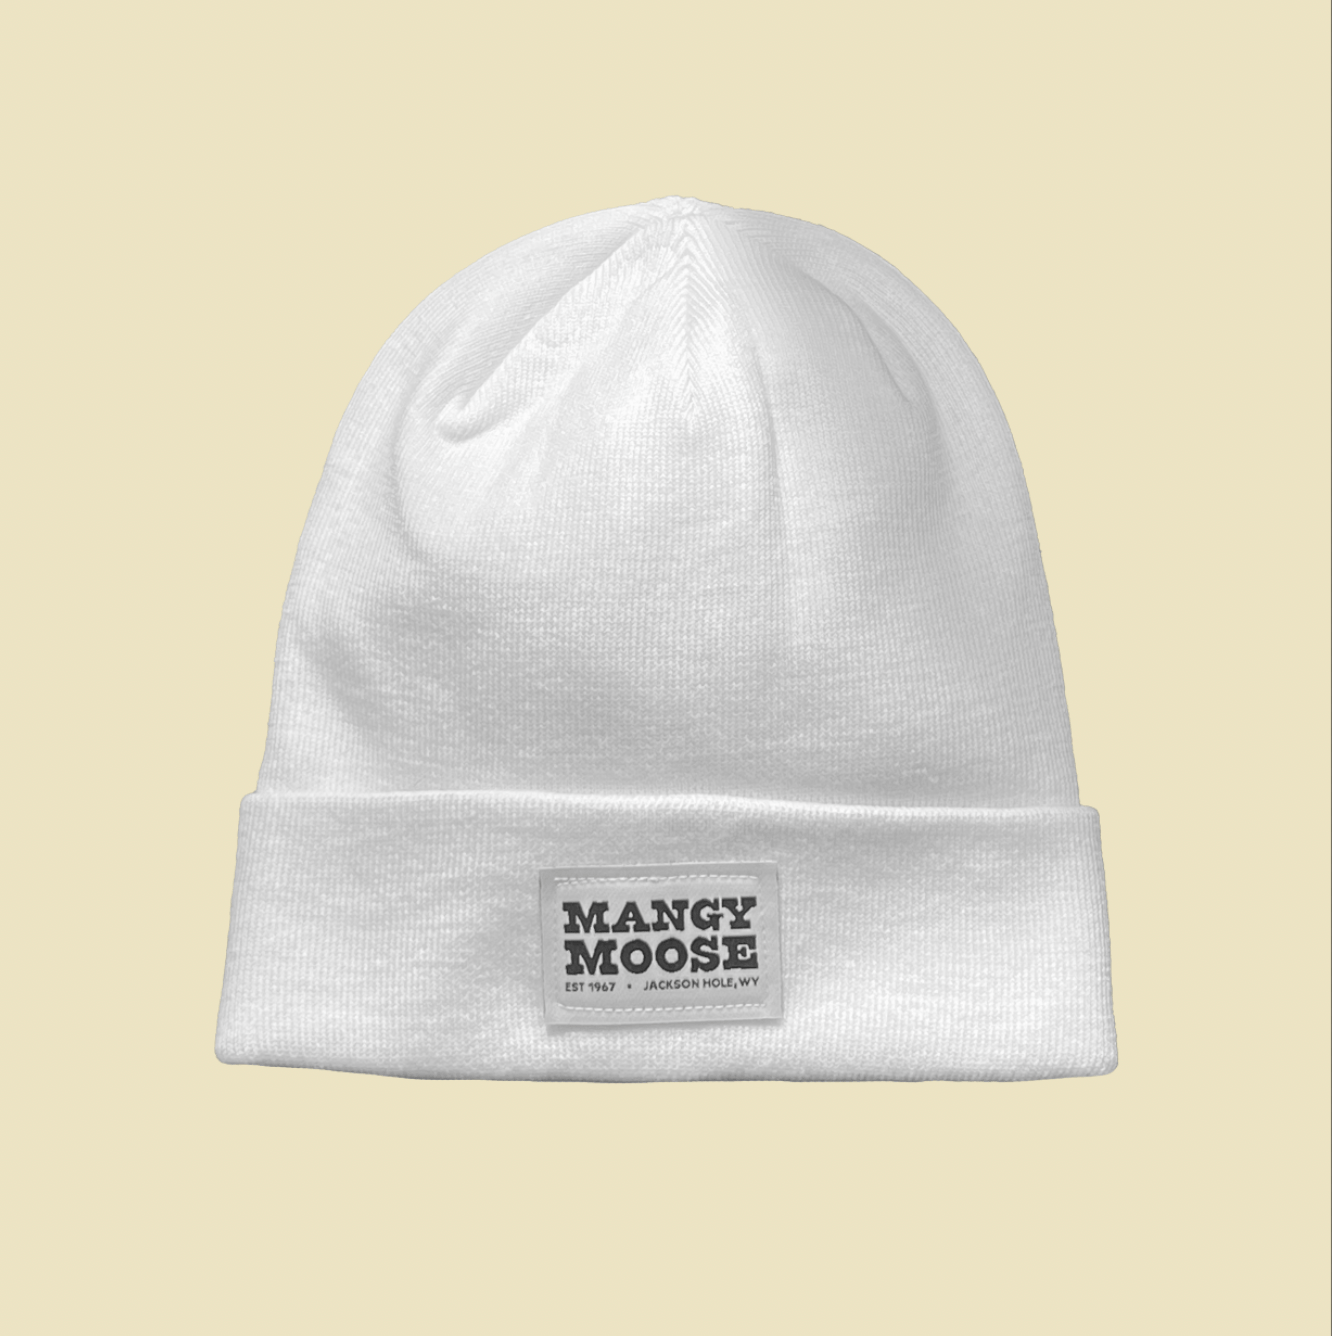 Mangy Moose Beanie - Mangy Moose